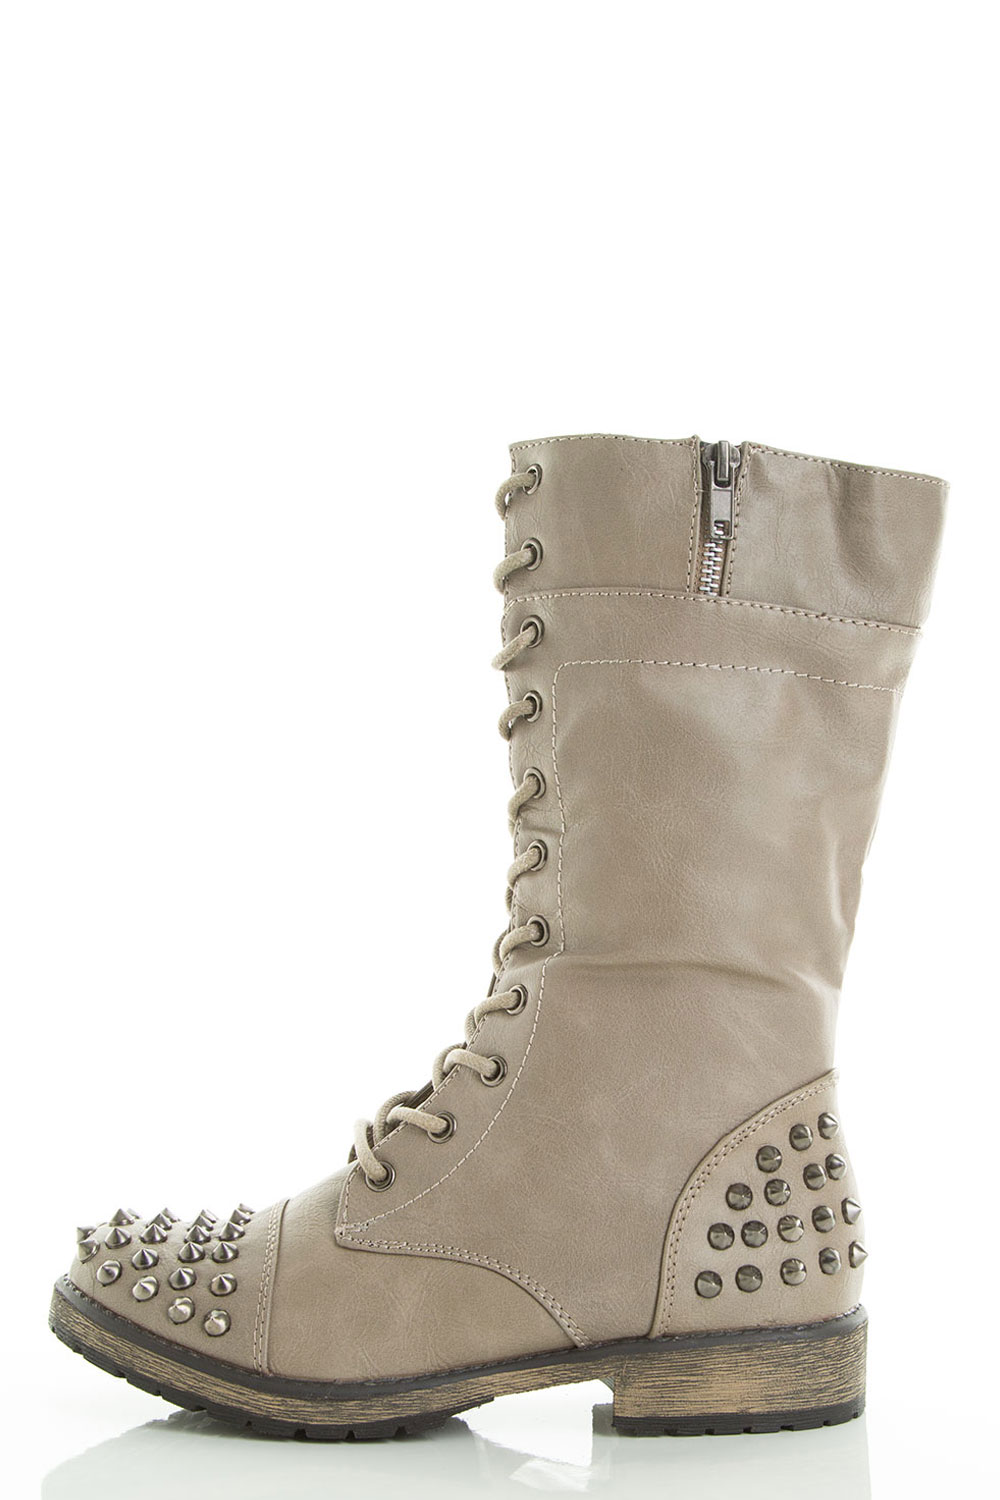 Spike Stud Lace Up Military Low Flat Heel Combat Ankle Boots